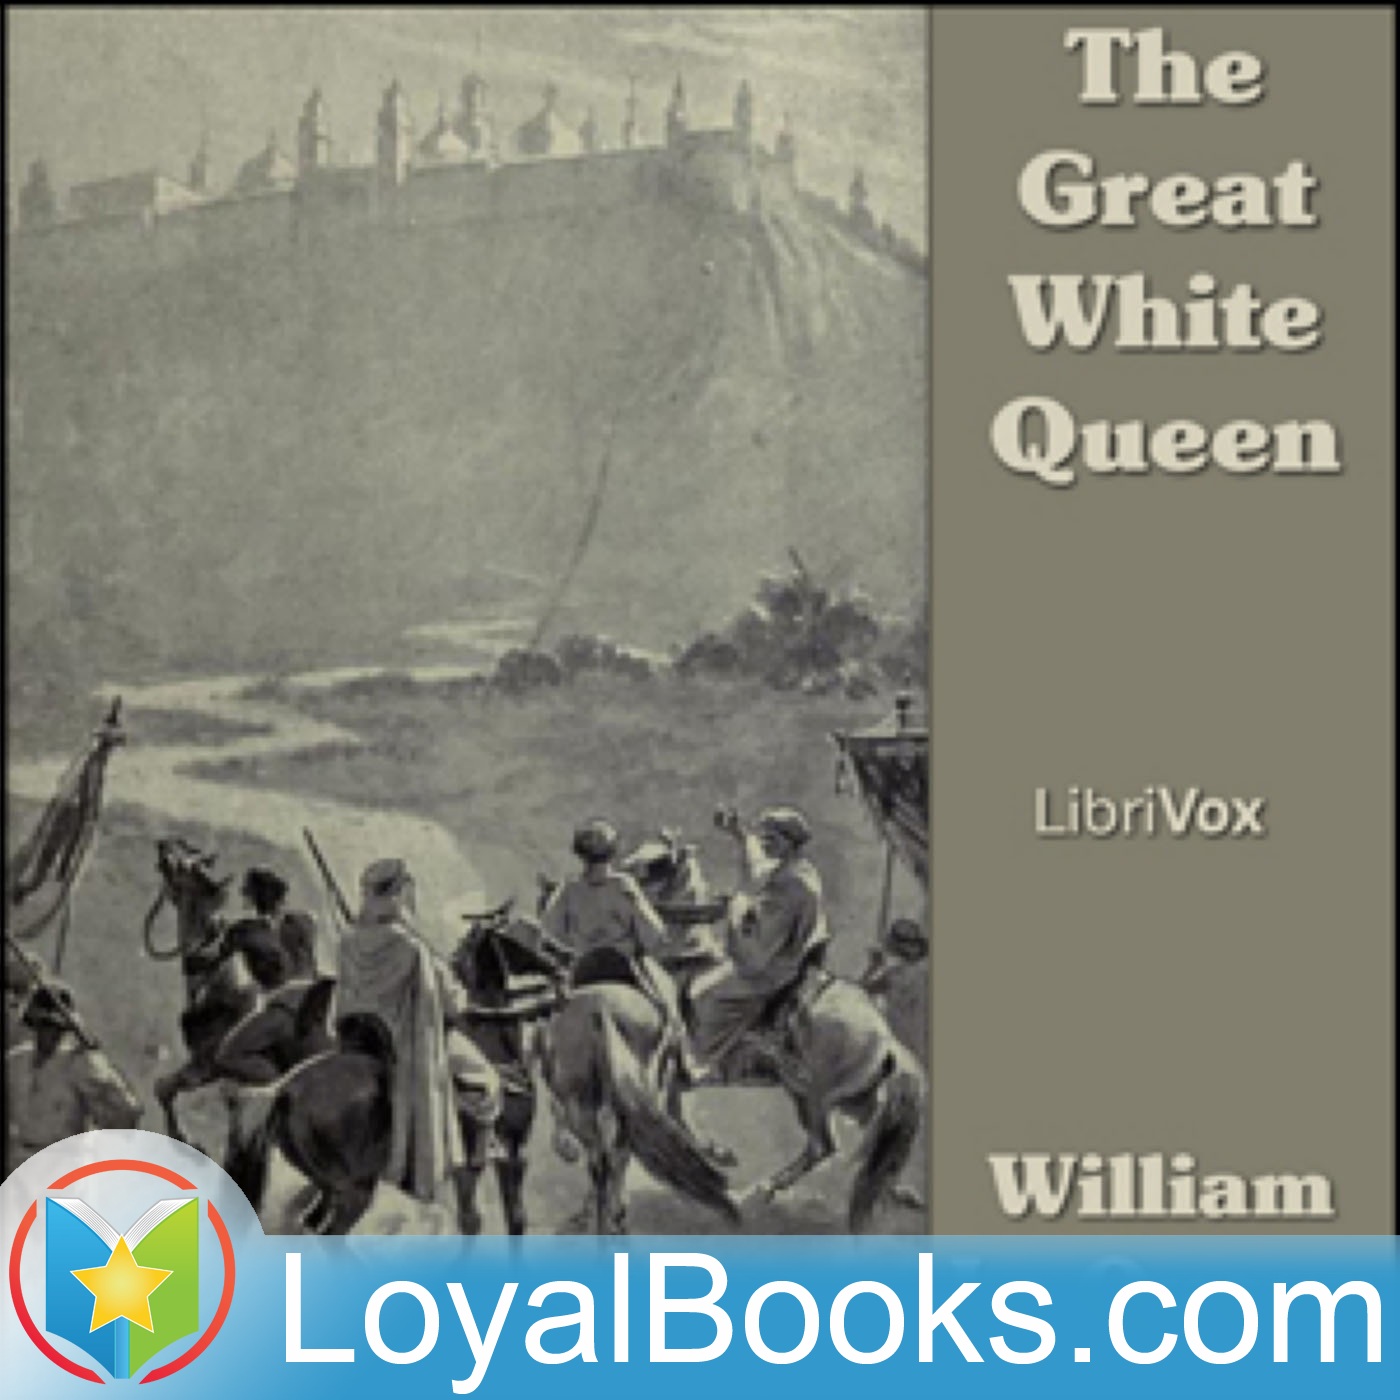 The Great White Queen by William Le Queux